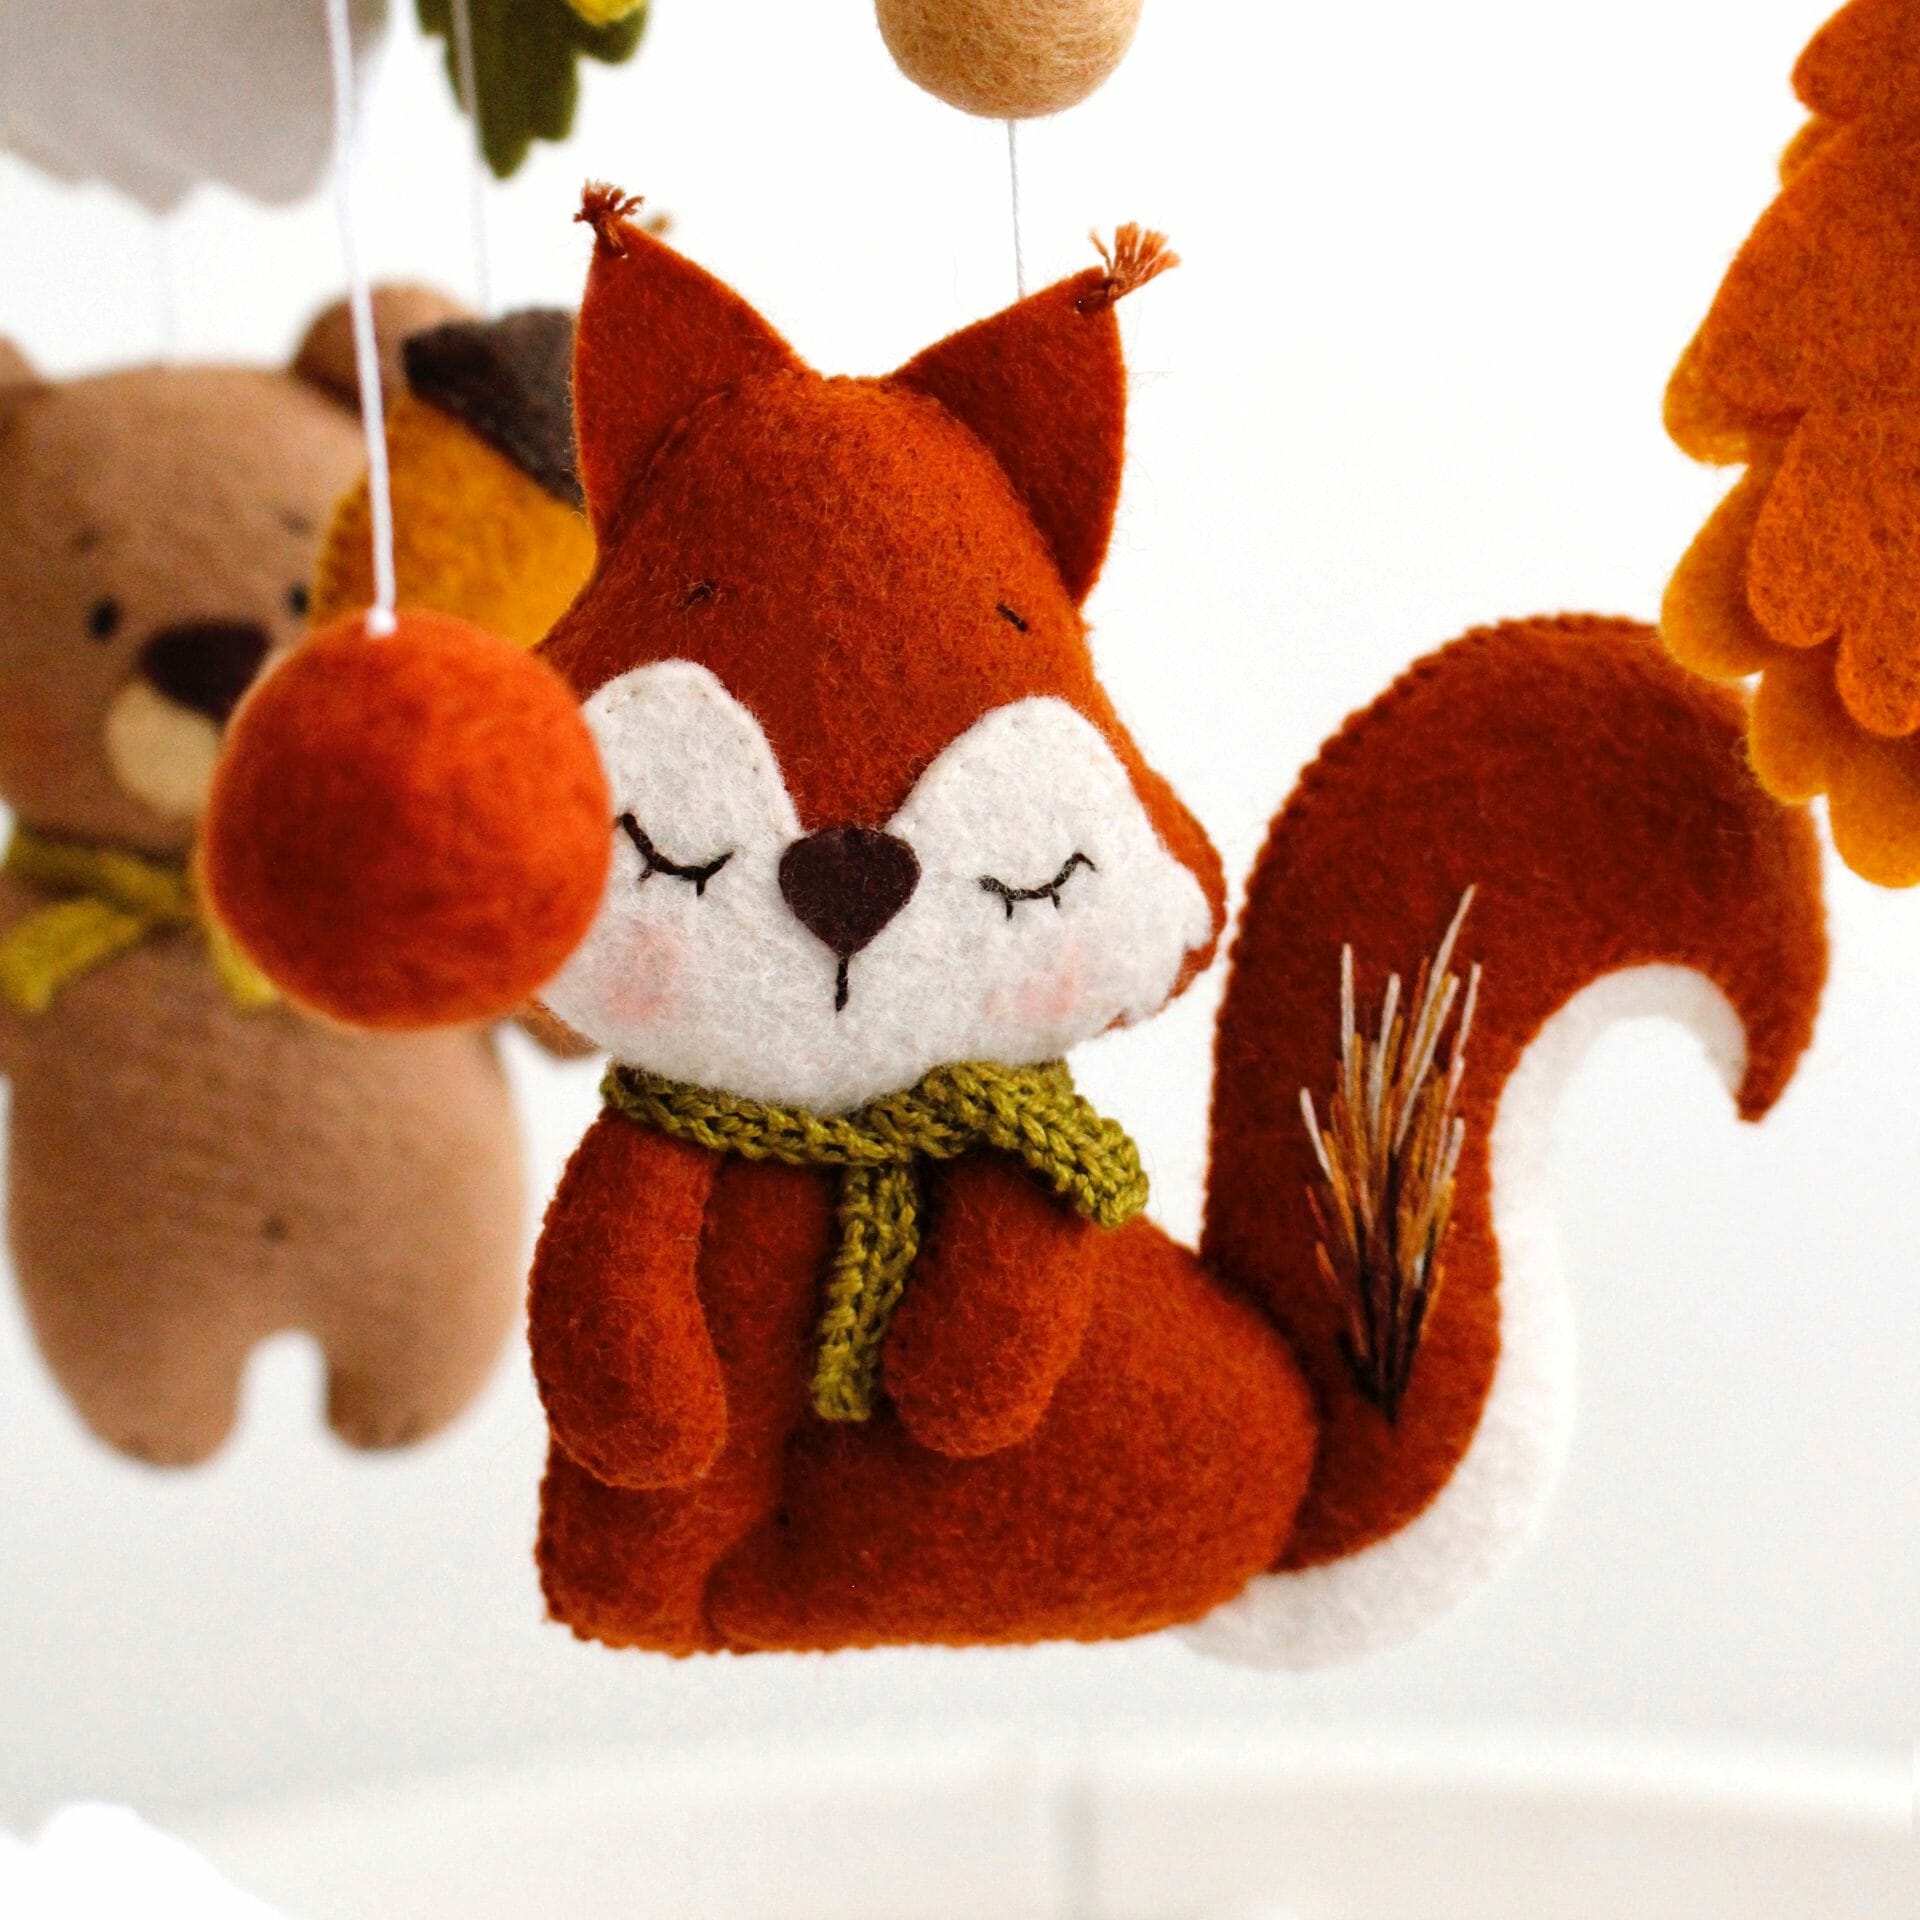 Felt forest baby mobile hero - cute squirrel with a scarf